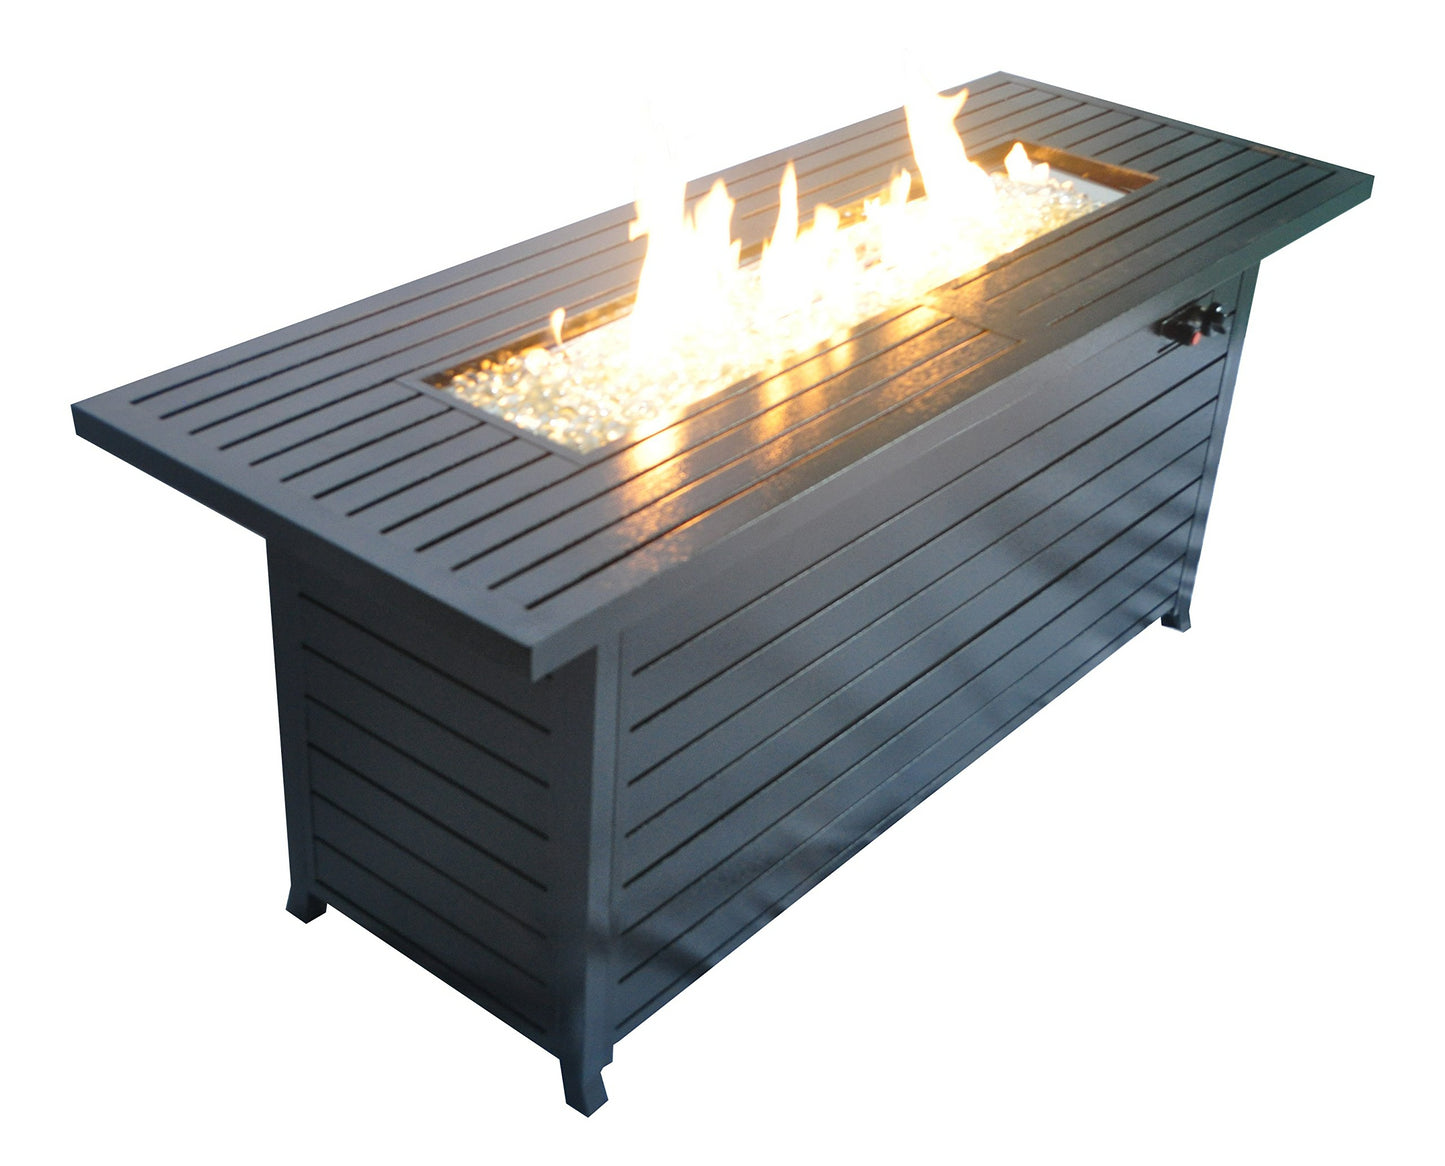 57-inch Propane Fire Pit Table with Lid and Fire Glass - Hammered Black Aluminum Outdoor Fireplace Dining Table